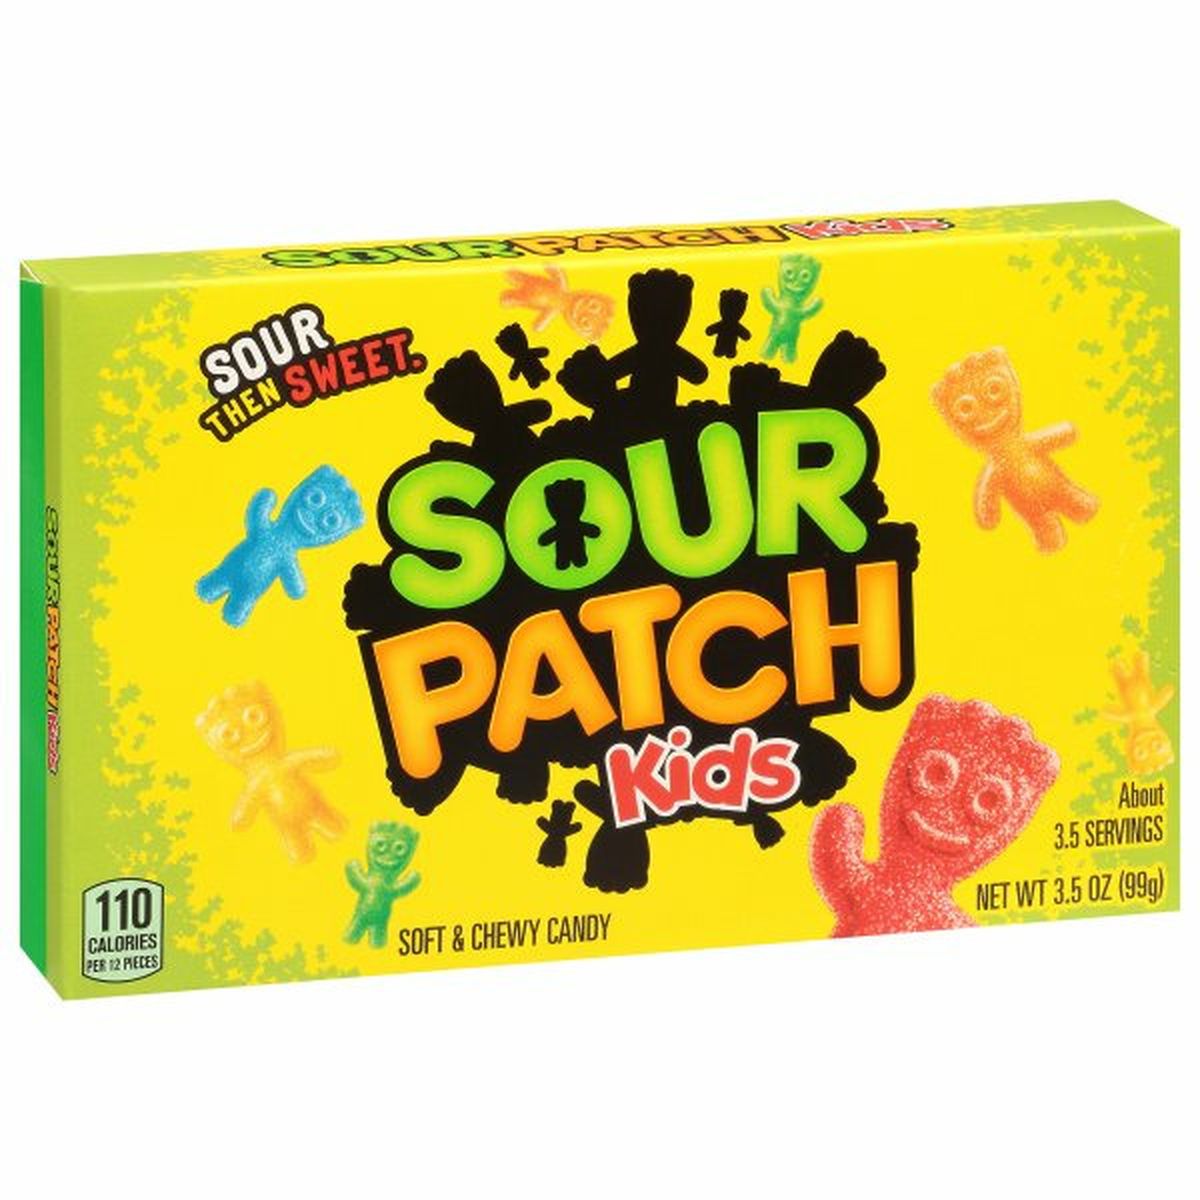 Calories in Sour Patch Kids Candy, Soft & Chewy